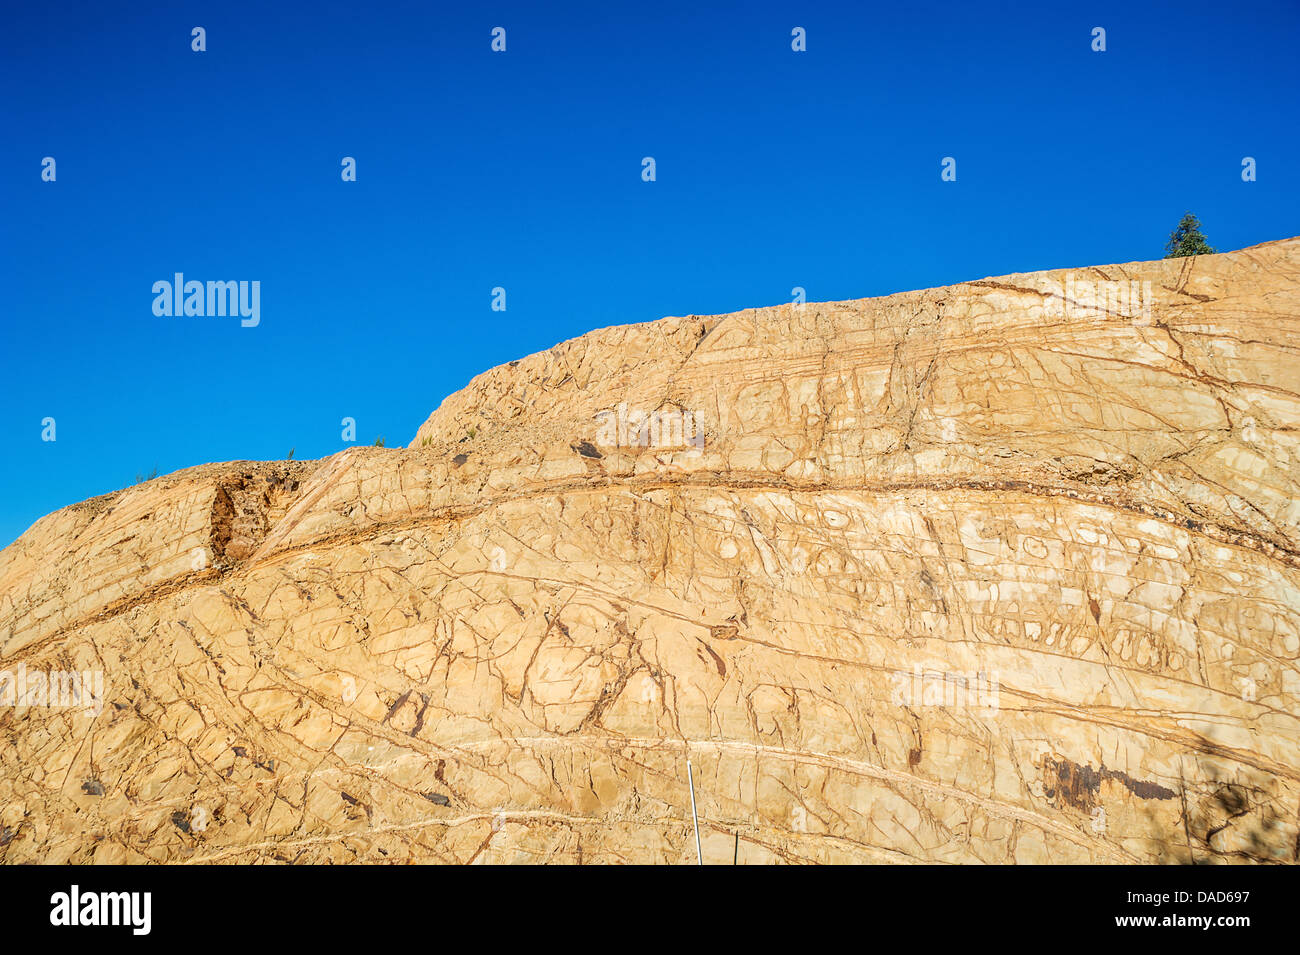 A rock face scarred by excavation Stock Photo